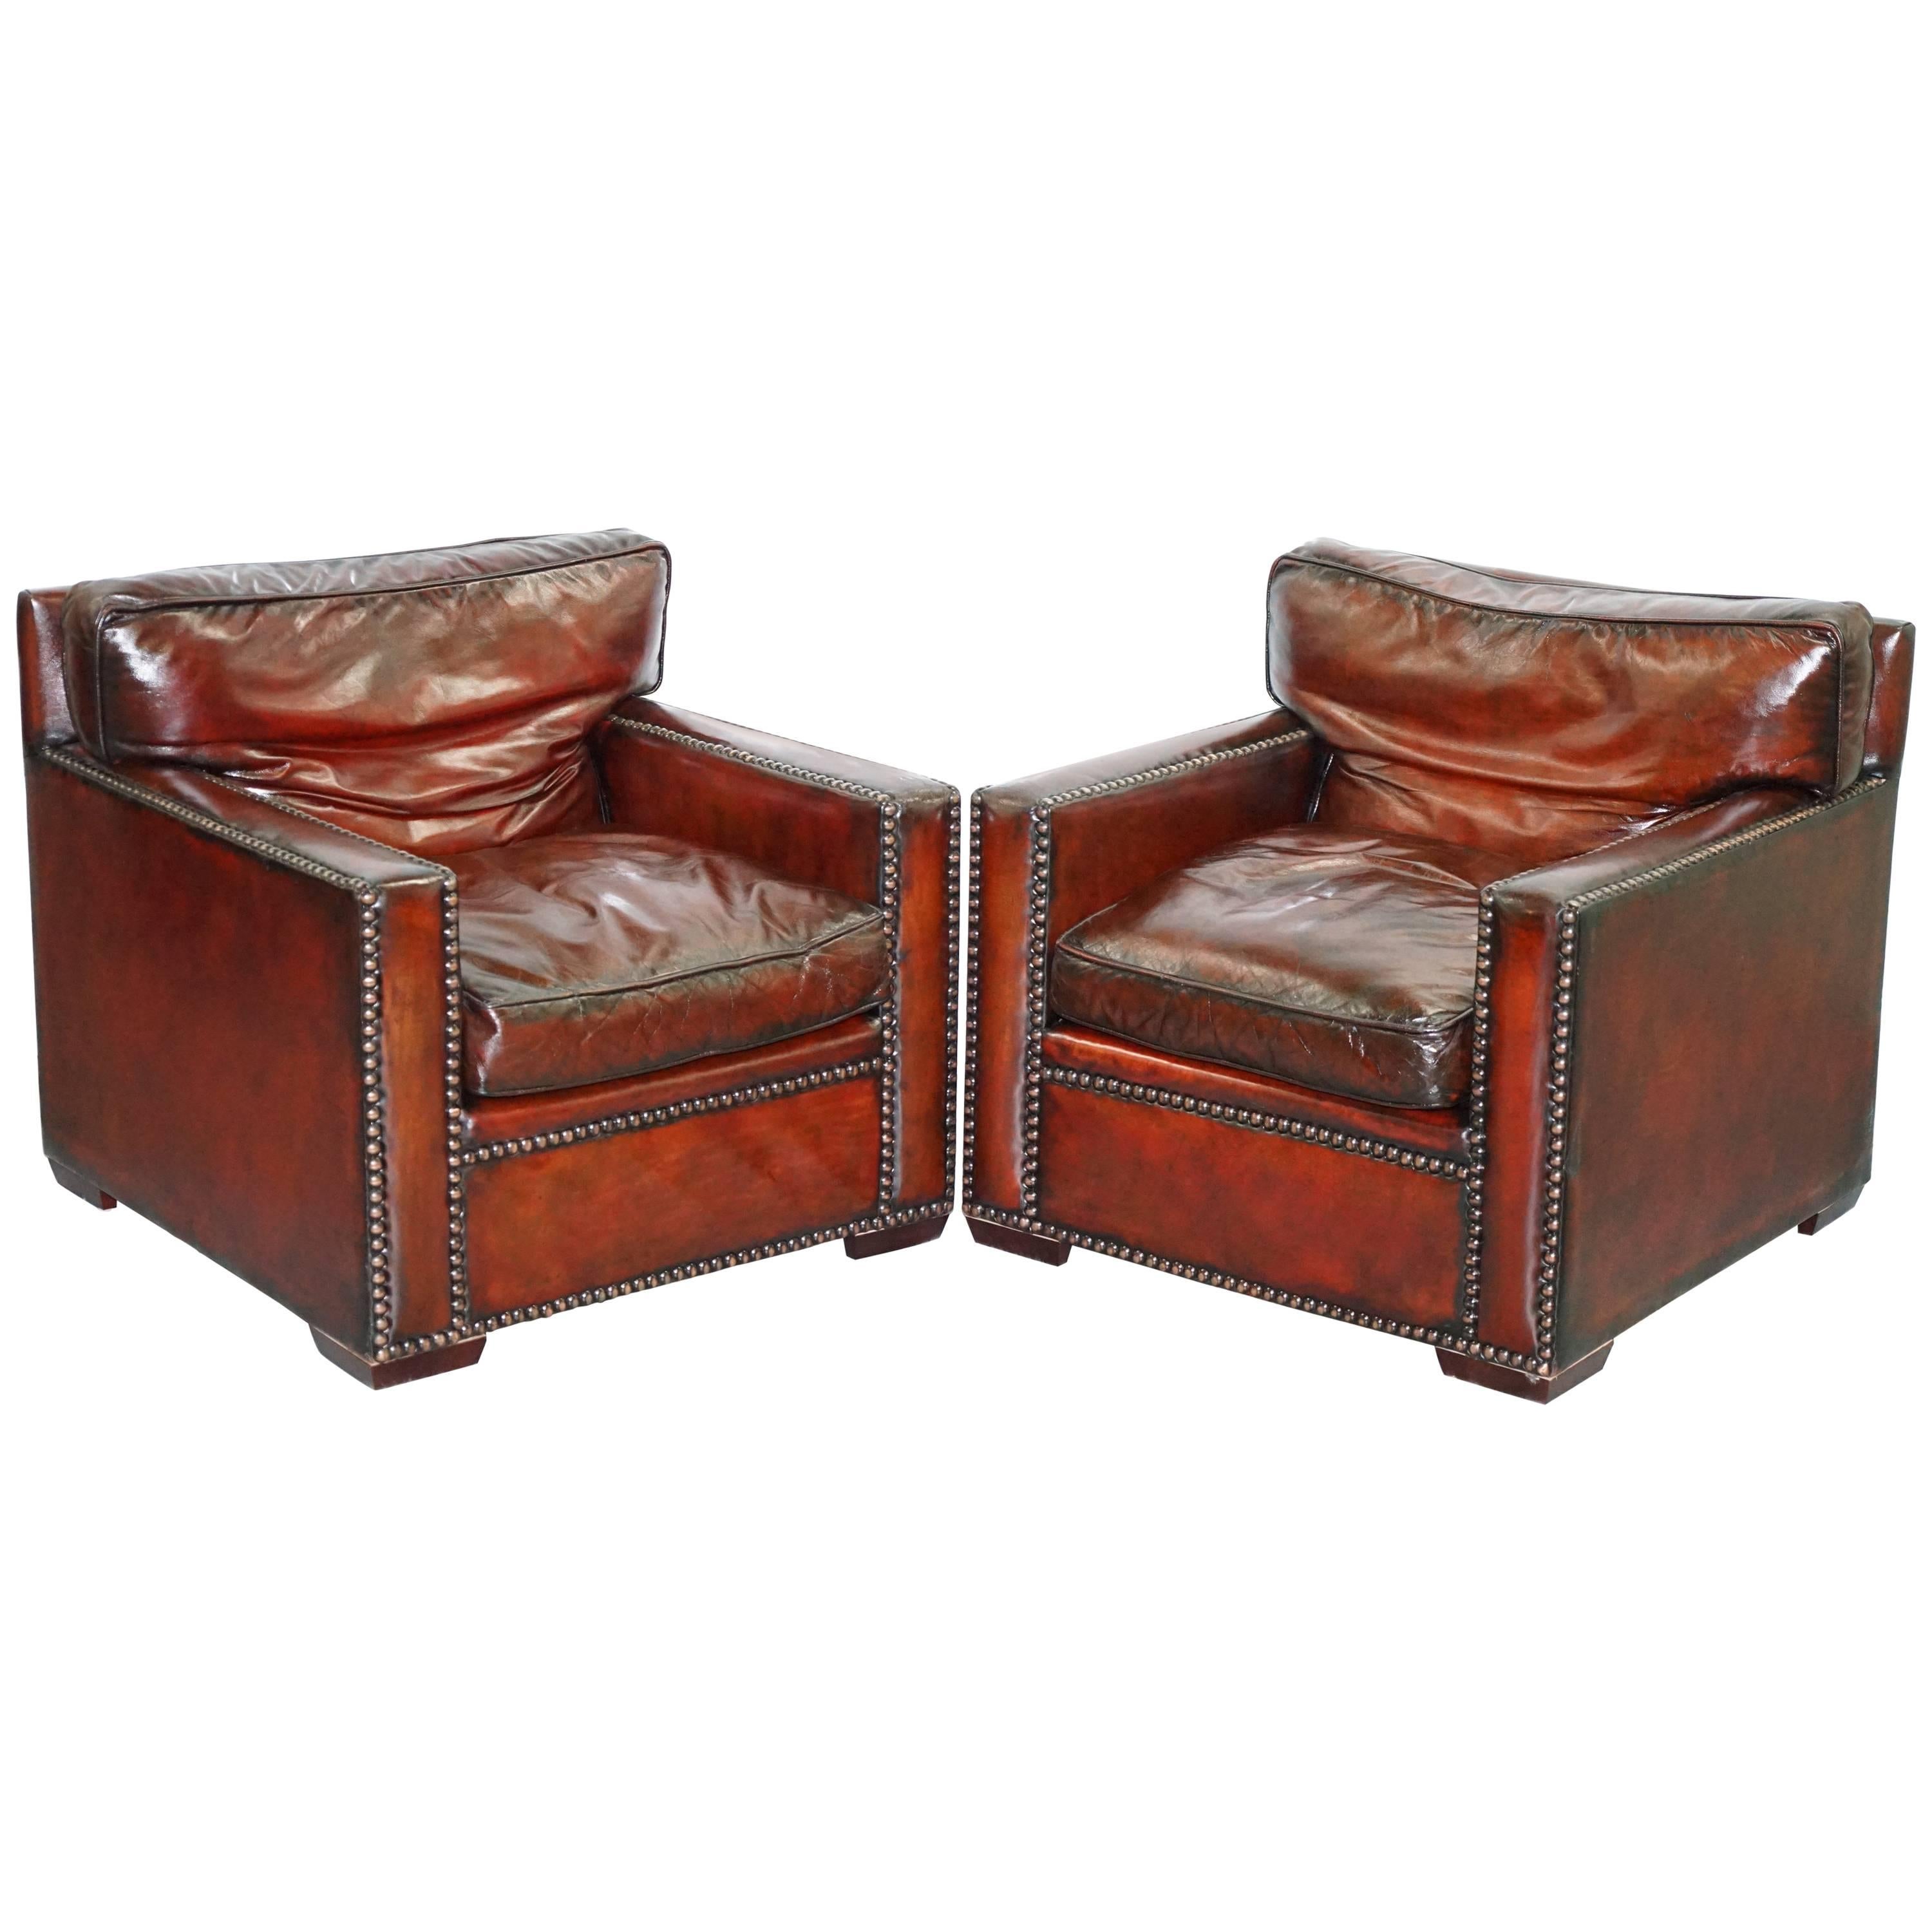 Stunning Pair of Vintage Made in Chelsea Bordeaux Leather Armchair Part of Suite